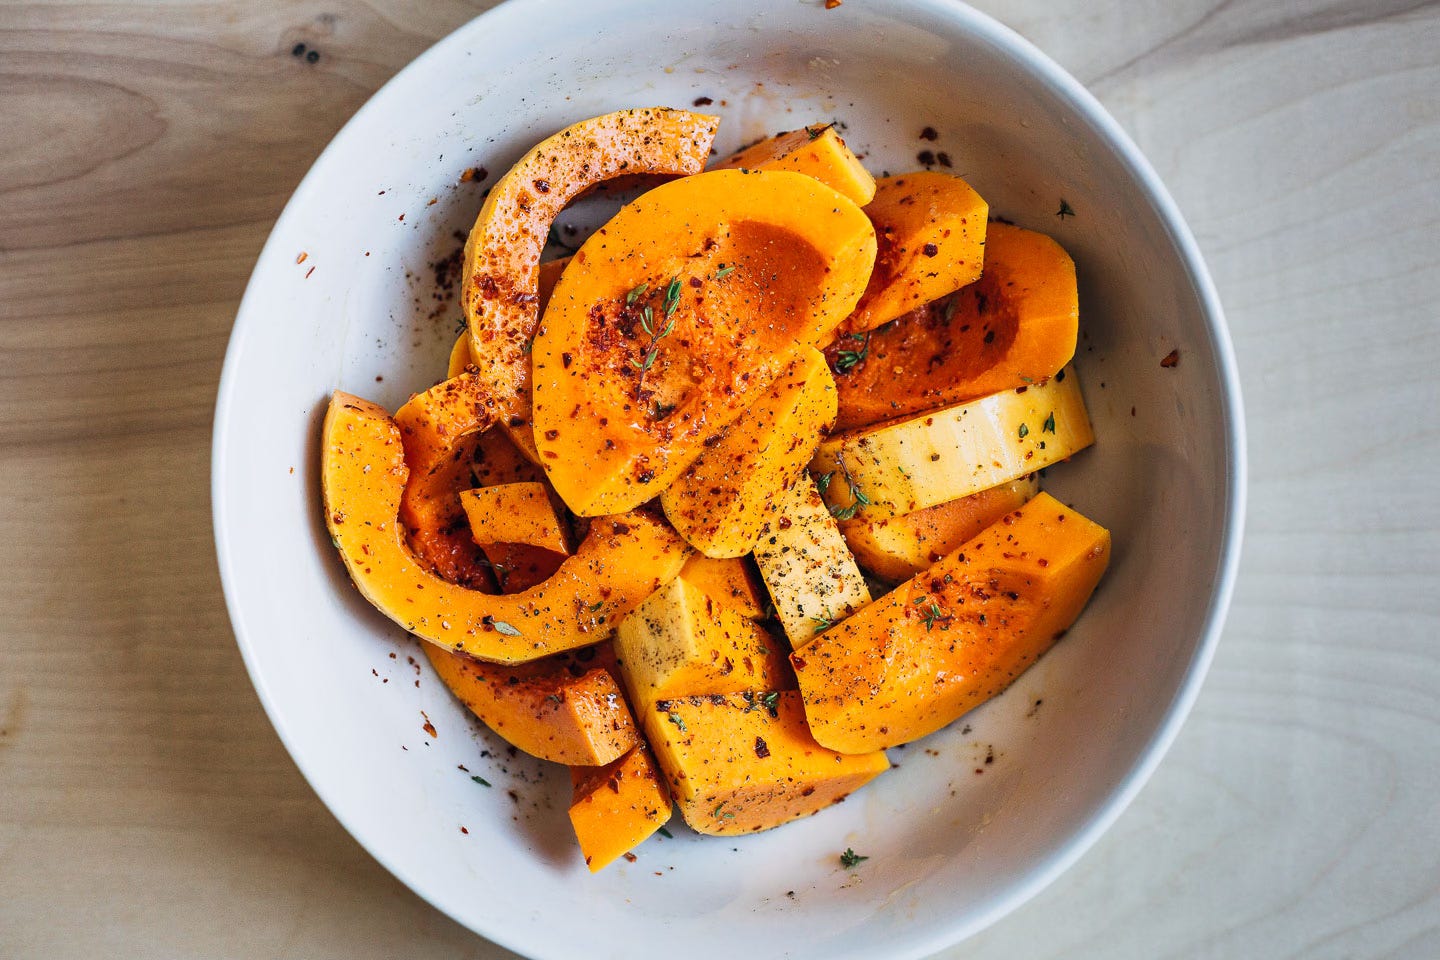 Sliced butternut squash coated with herbs and spices, in a bowl